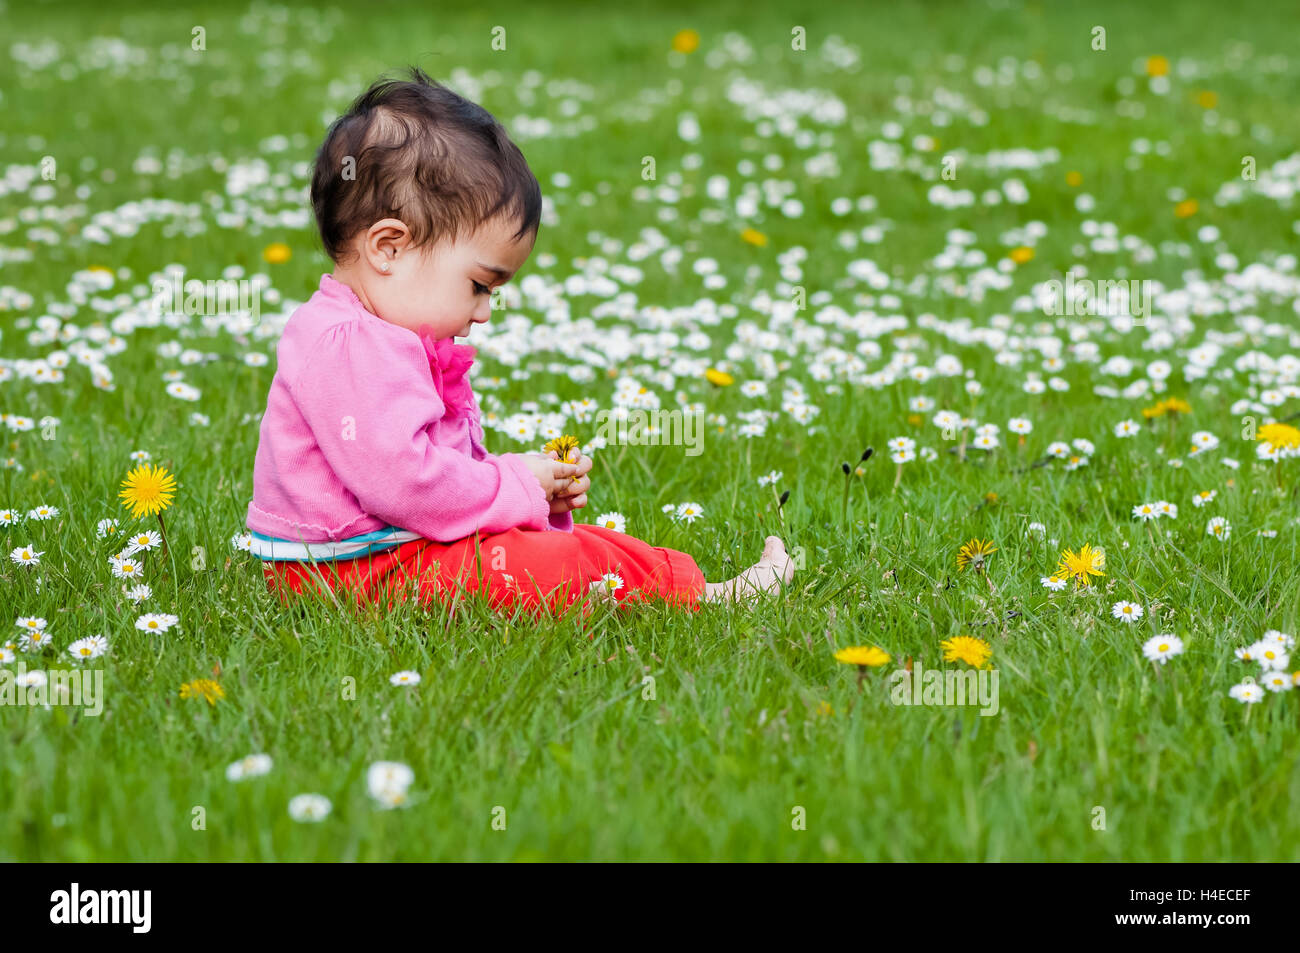 Cute chubby toddler looking at a daisy flower curiously exploring nature outdoors in the park Stock Photo